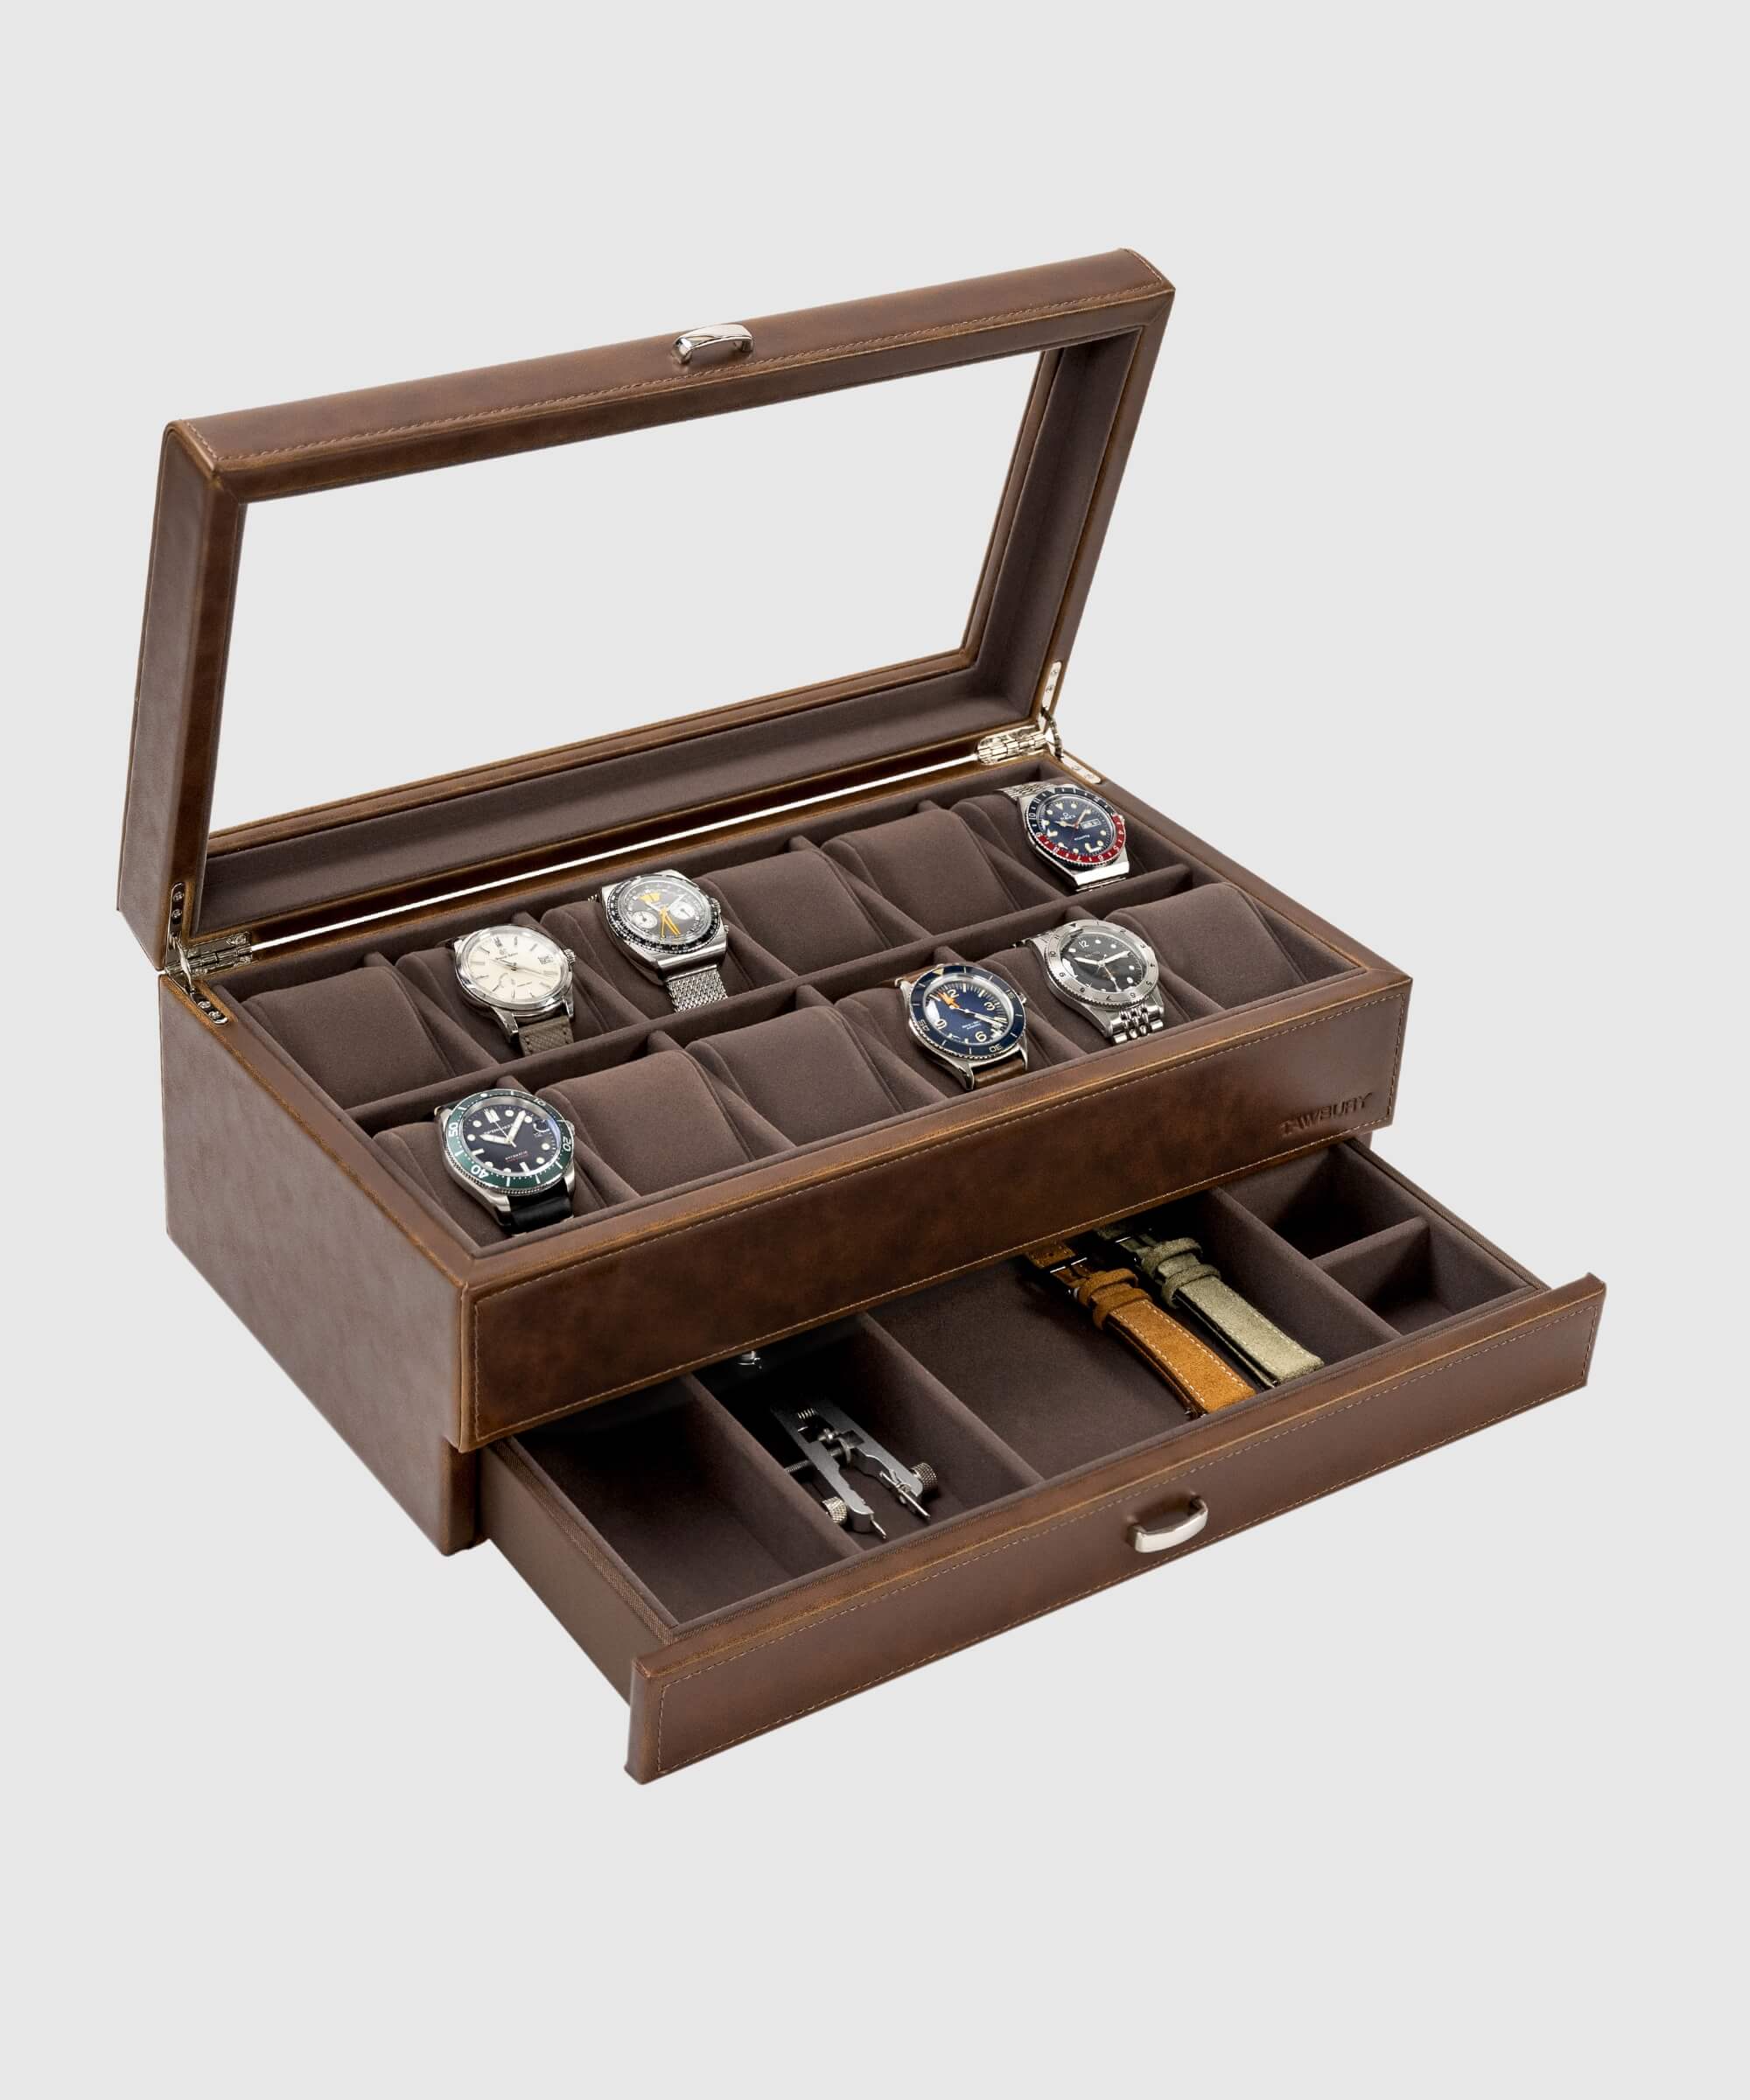 A Bayswater 12 Slot Watch Box with Drawer - Brown made by TAWBURY for storage of multiple timepieces.